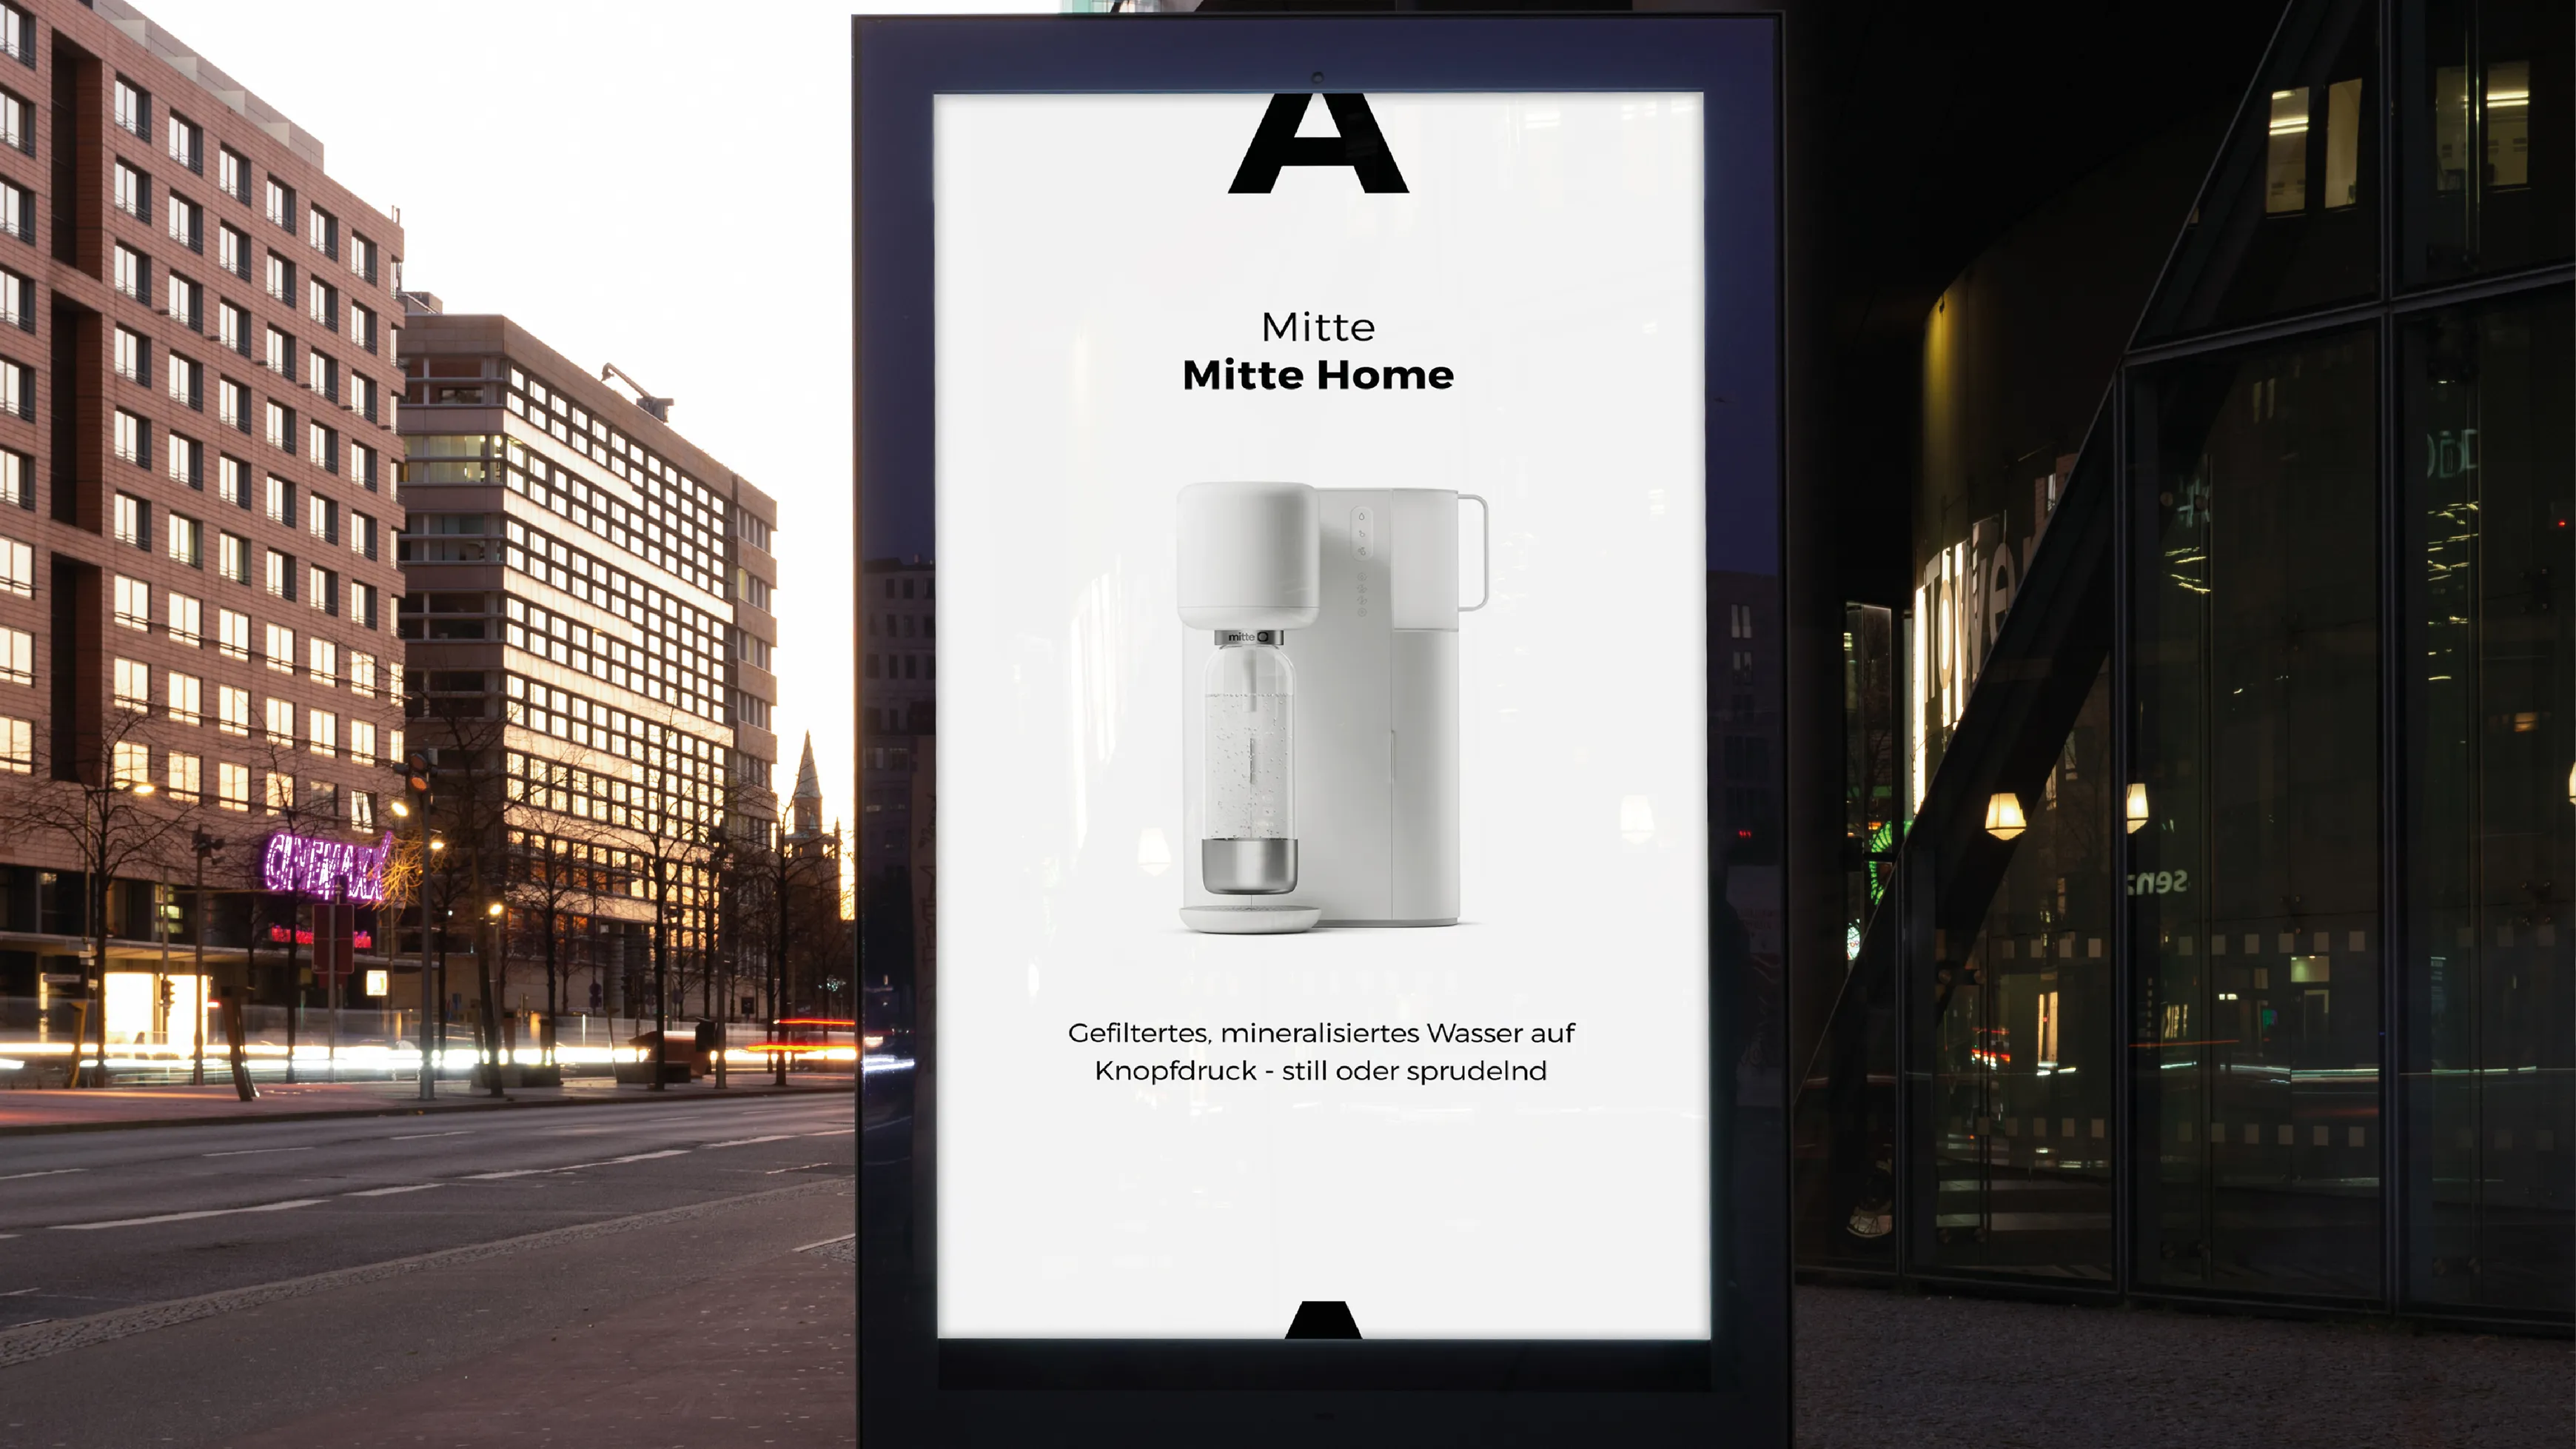 An outdoor ad for the Mitte water purifier